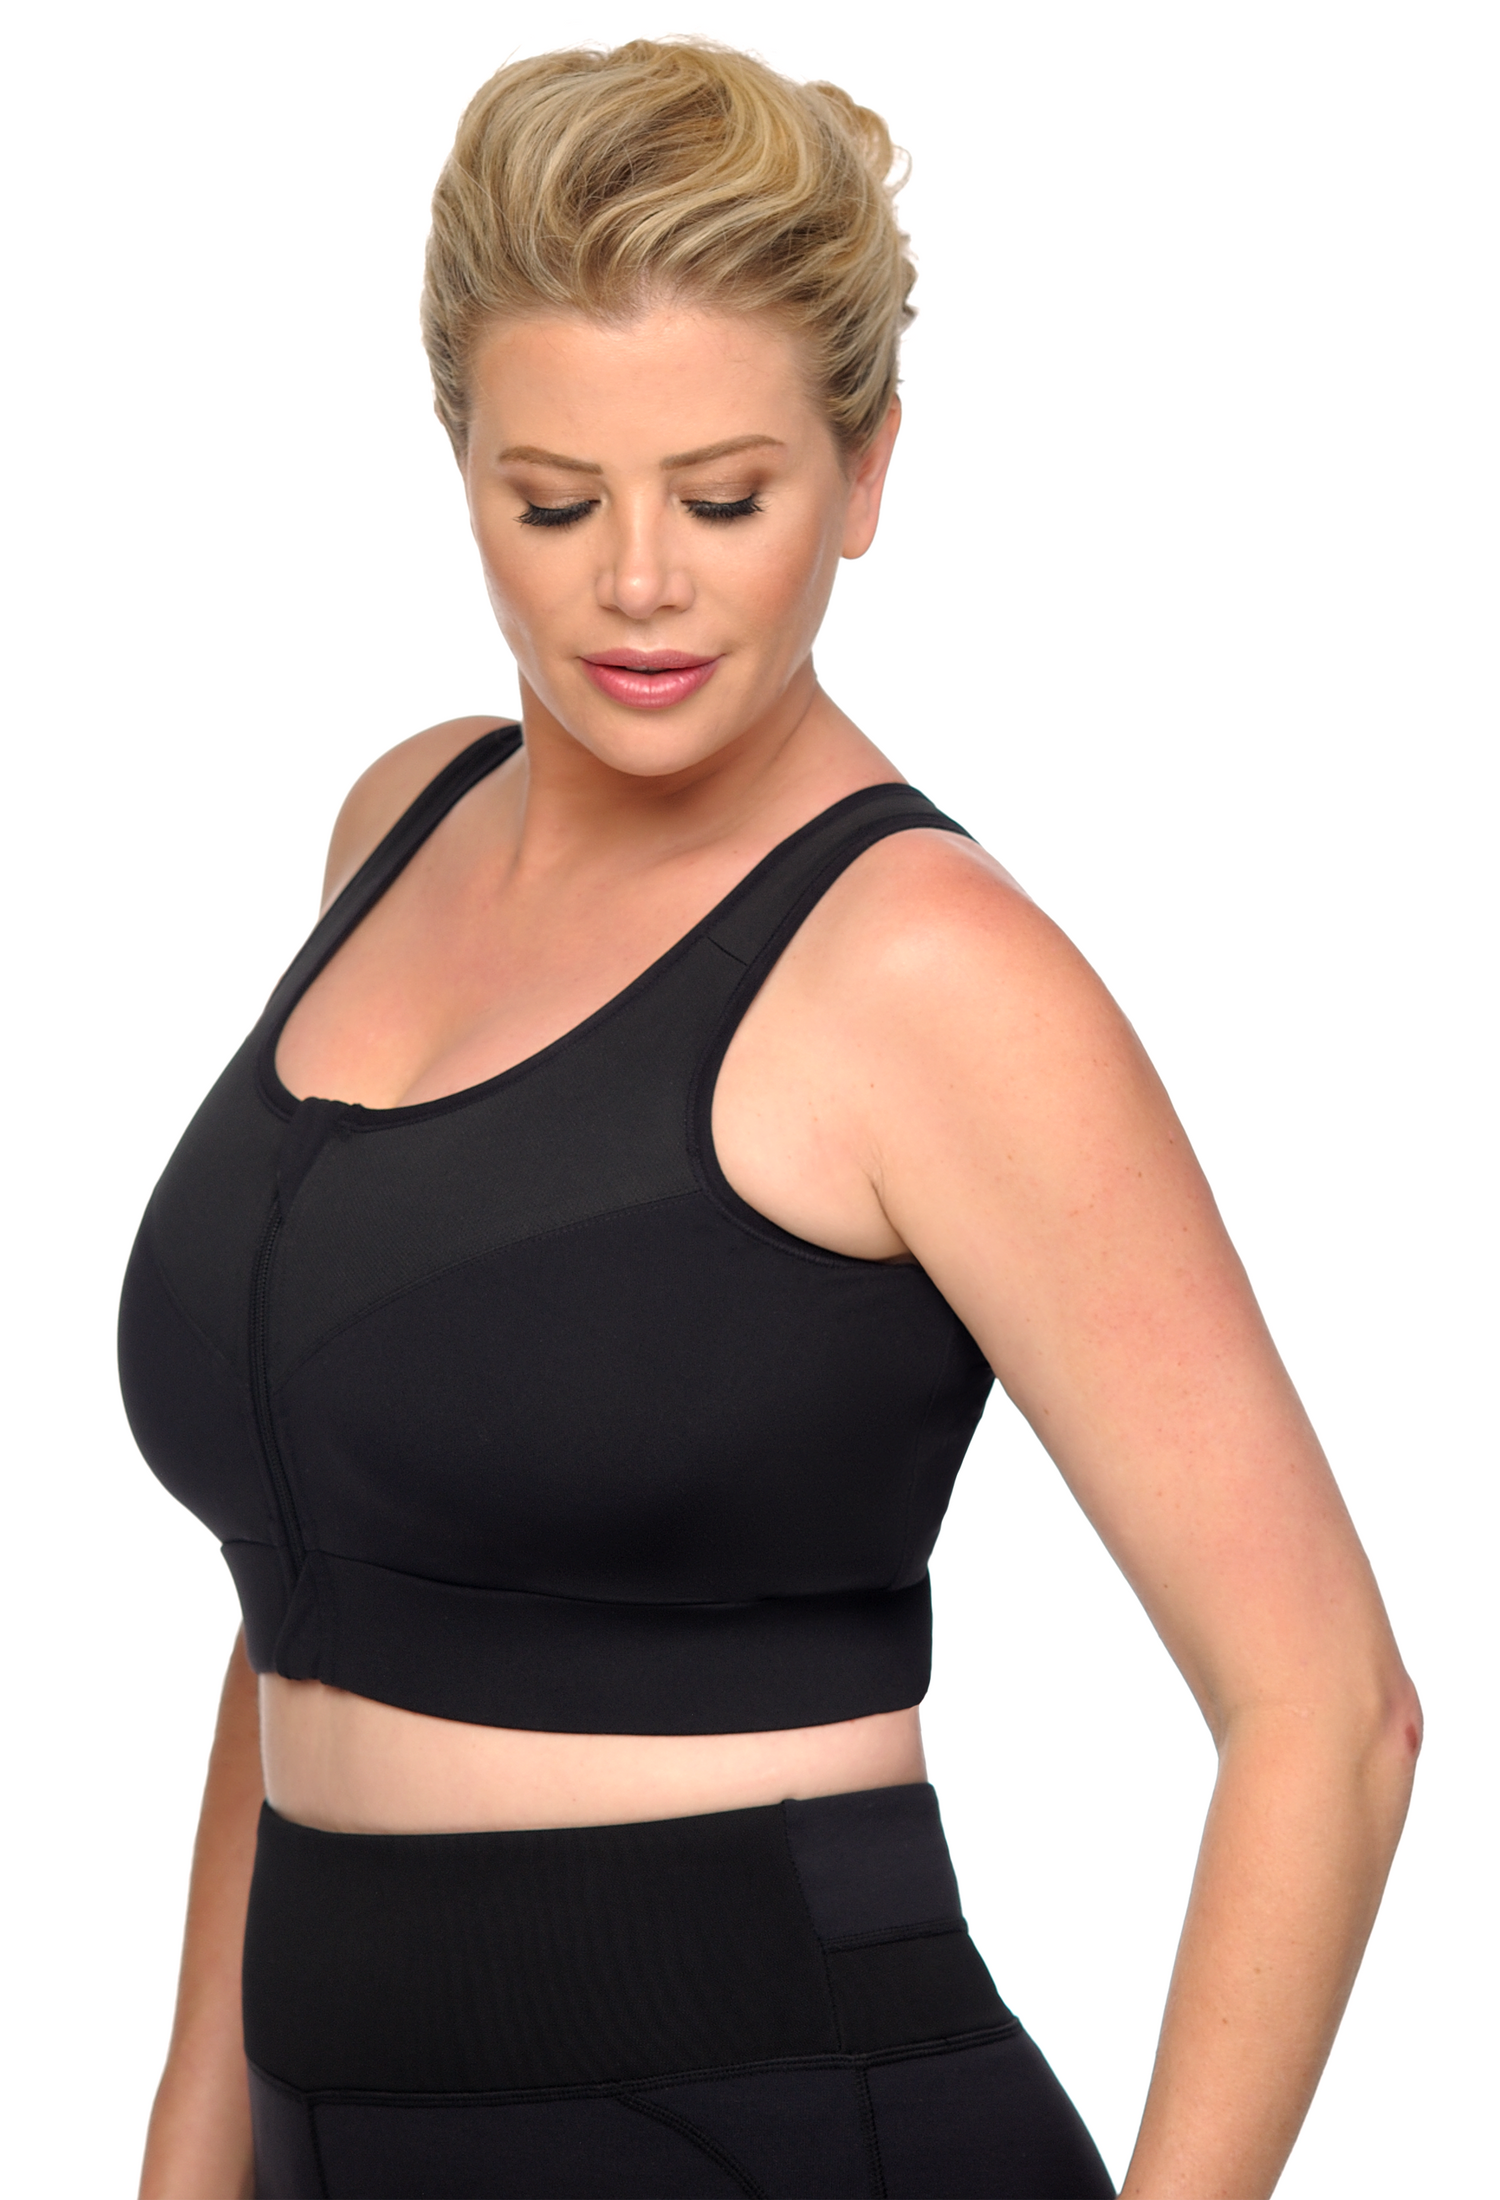 Compression Sport Bra, Wireless with Front zipper. OUR SPORT BRAS RUN BIG IN SIZE. Choose One Size Smaller Than Your Regular Size.